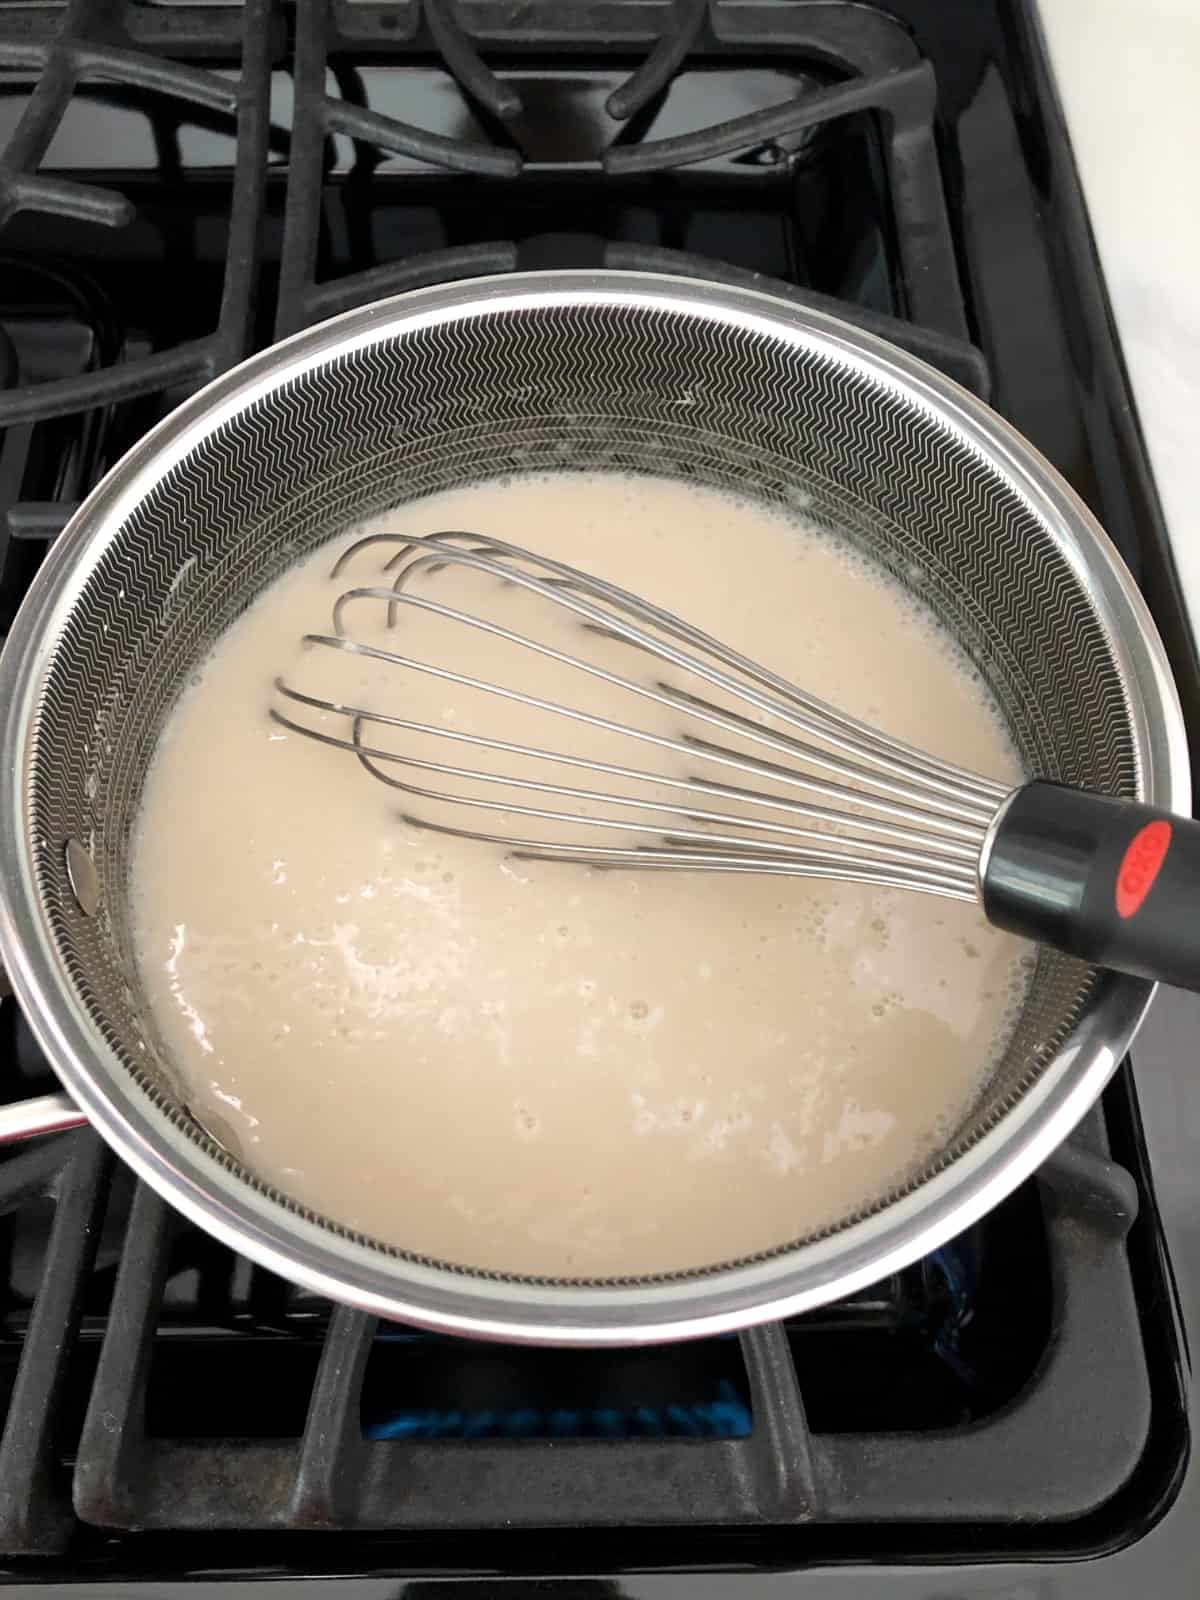 Whisking lite coconut milk, agave nectar and cornstarch in saucepan on stove.